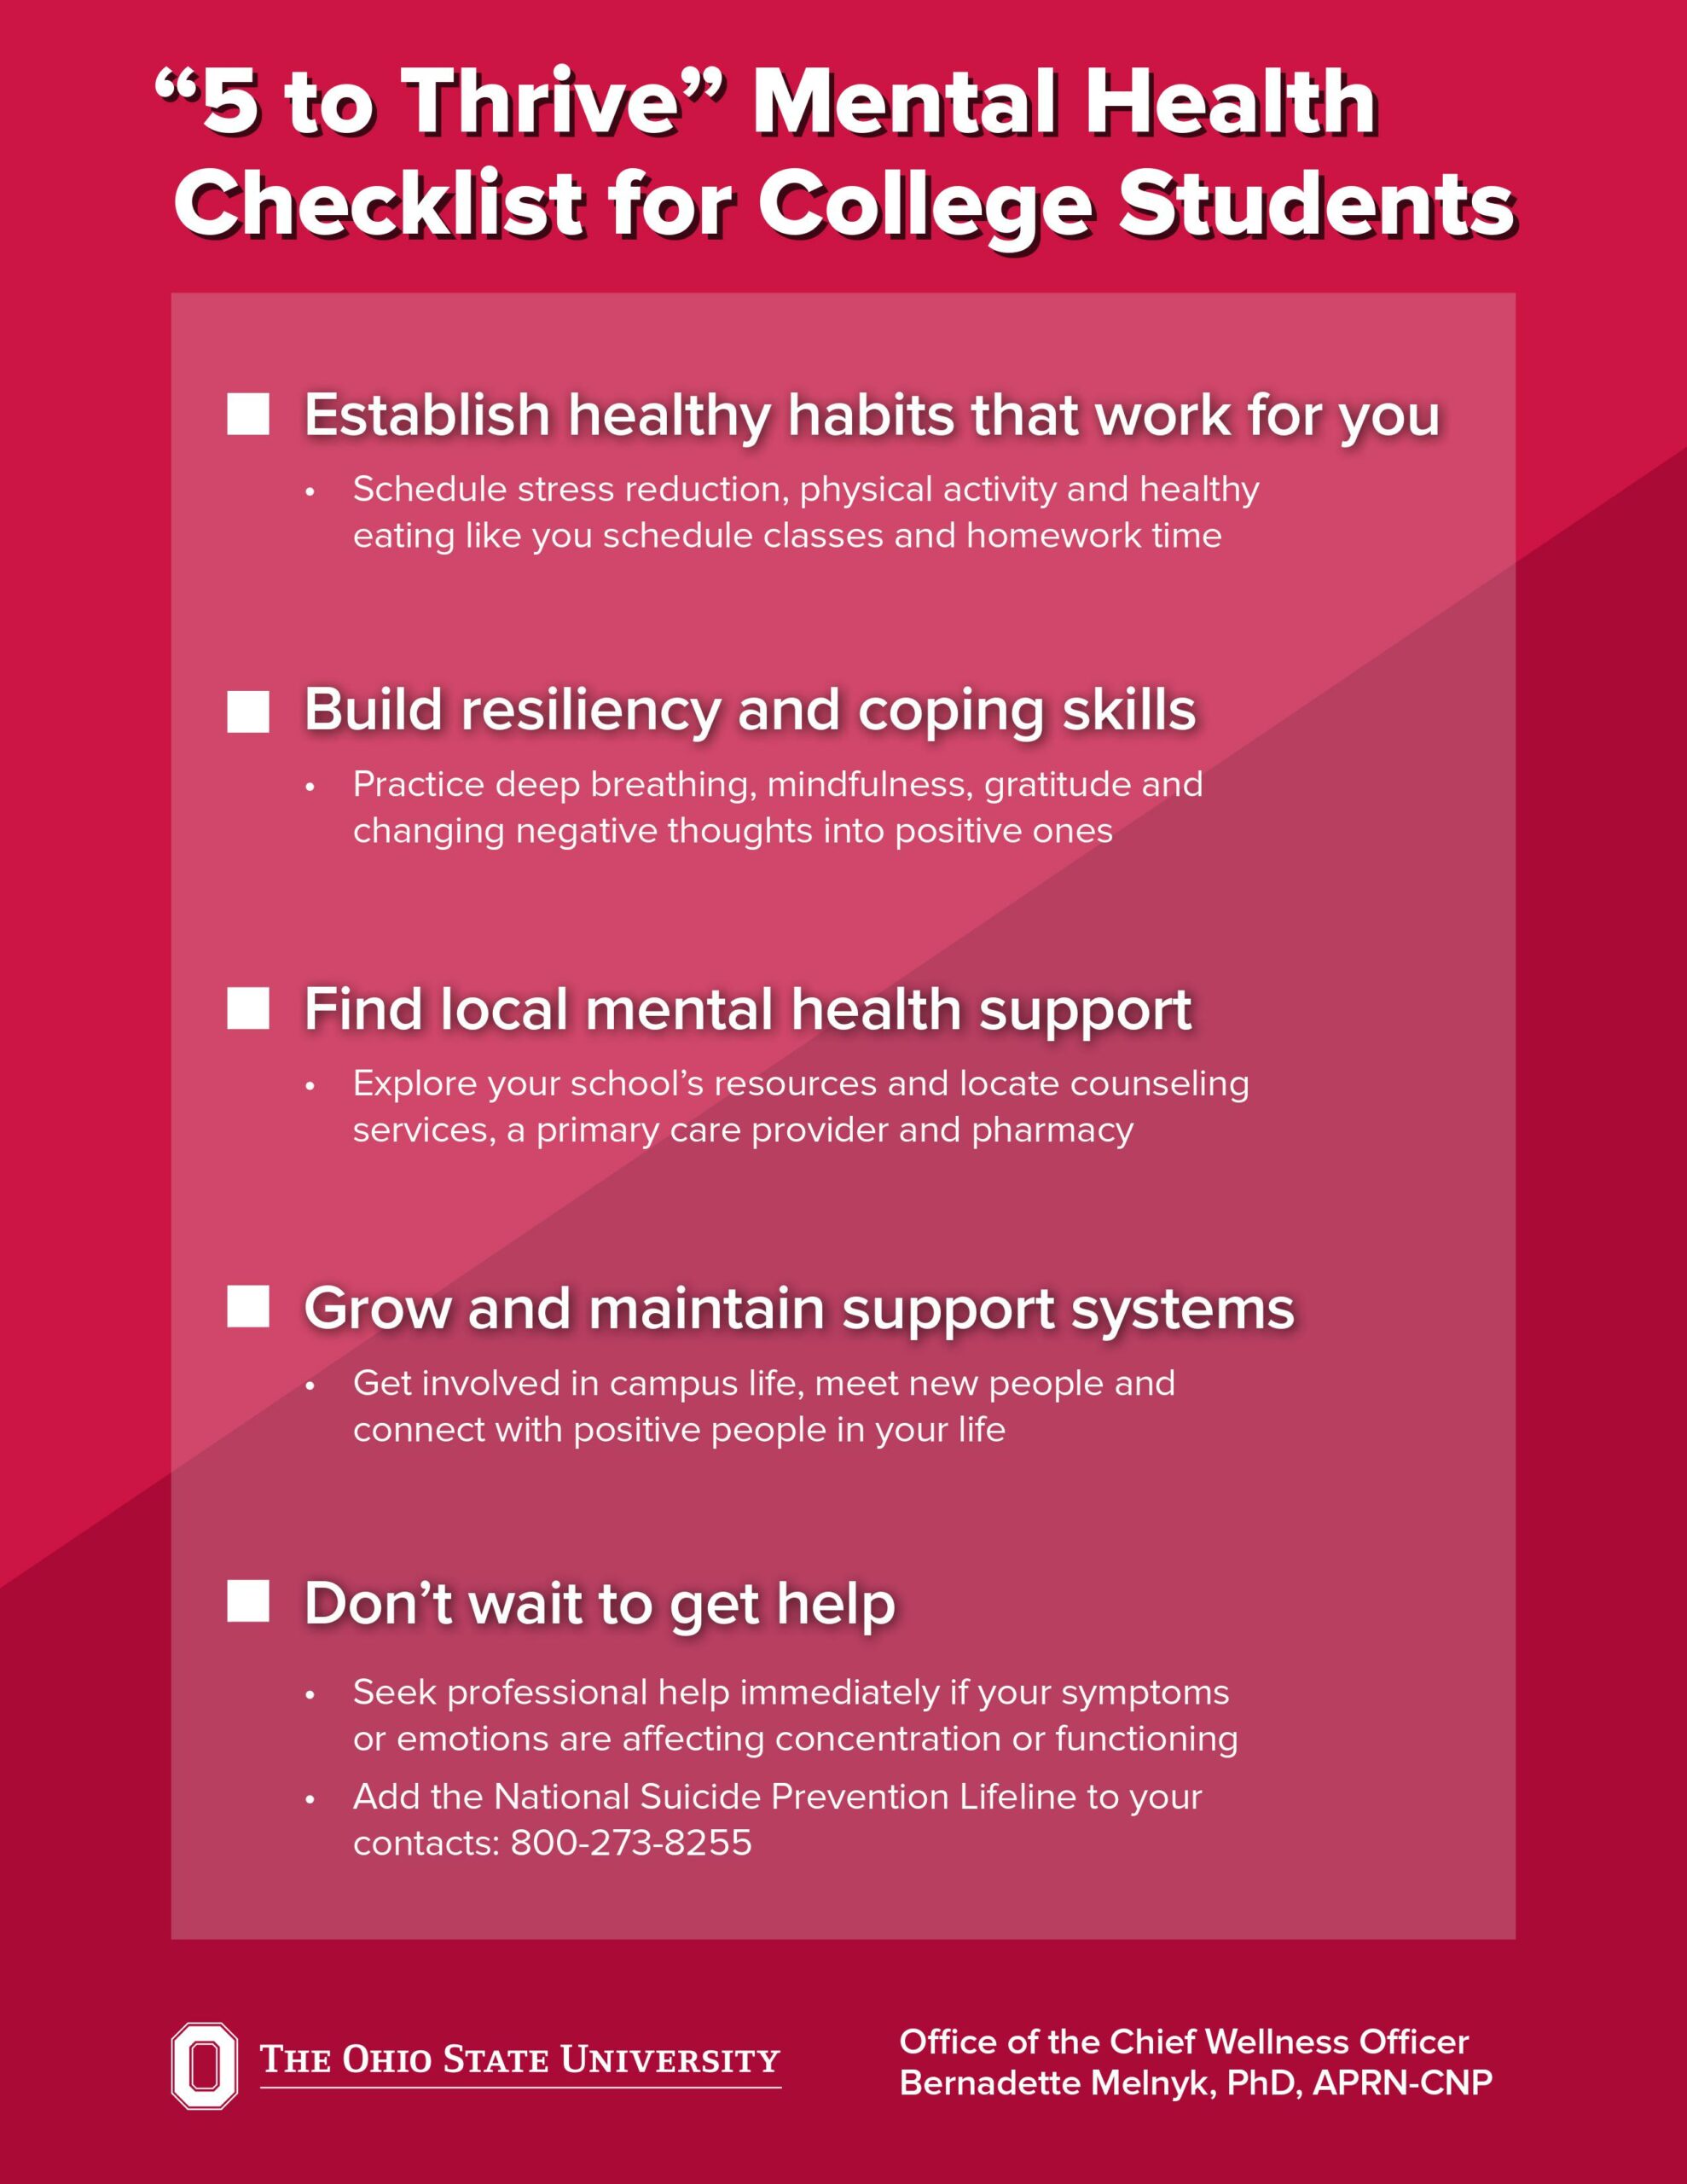 Ohio State's “5 to Thrive” mental health checklist. (Click to enlarge)